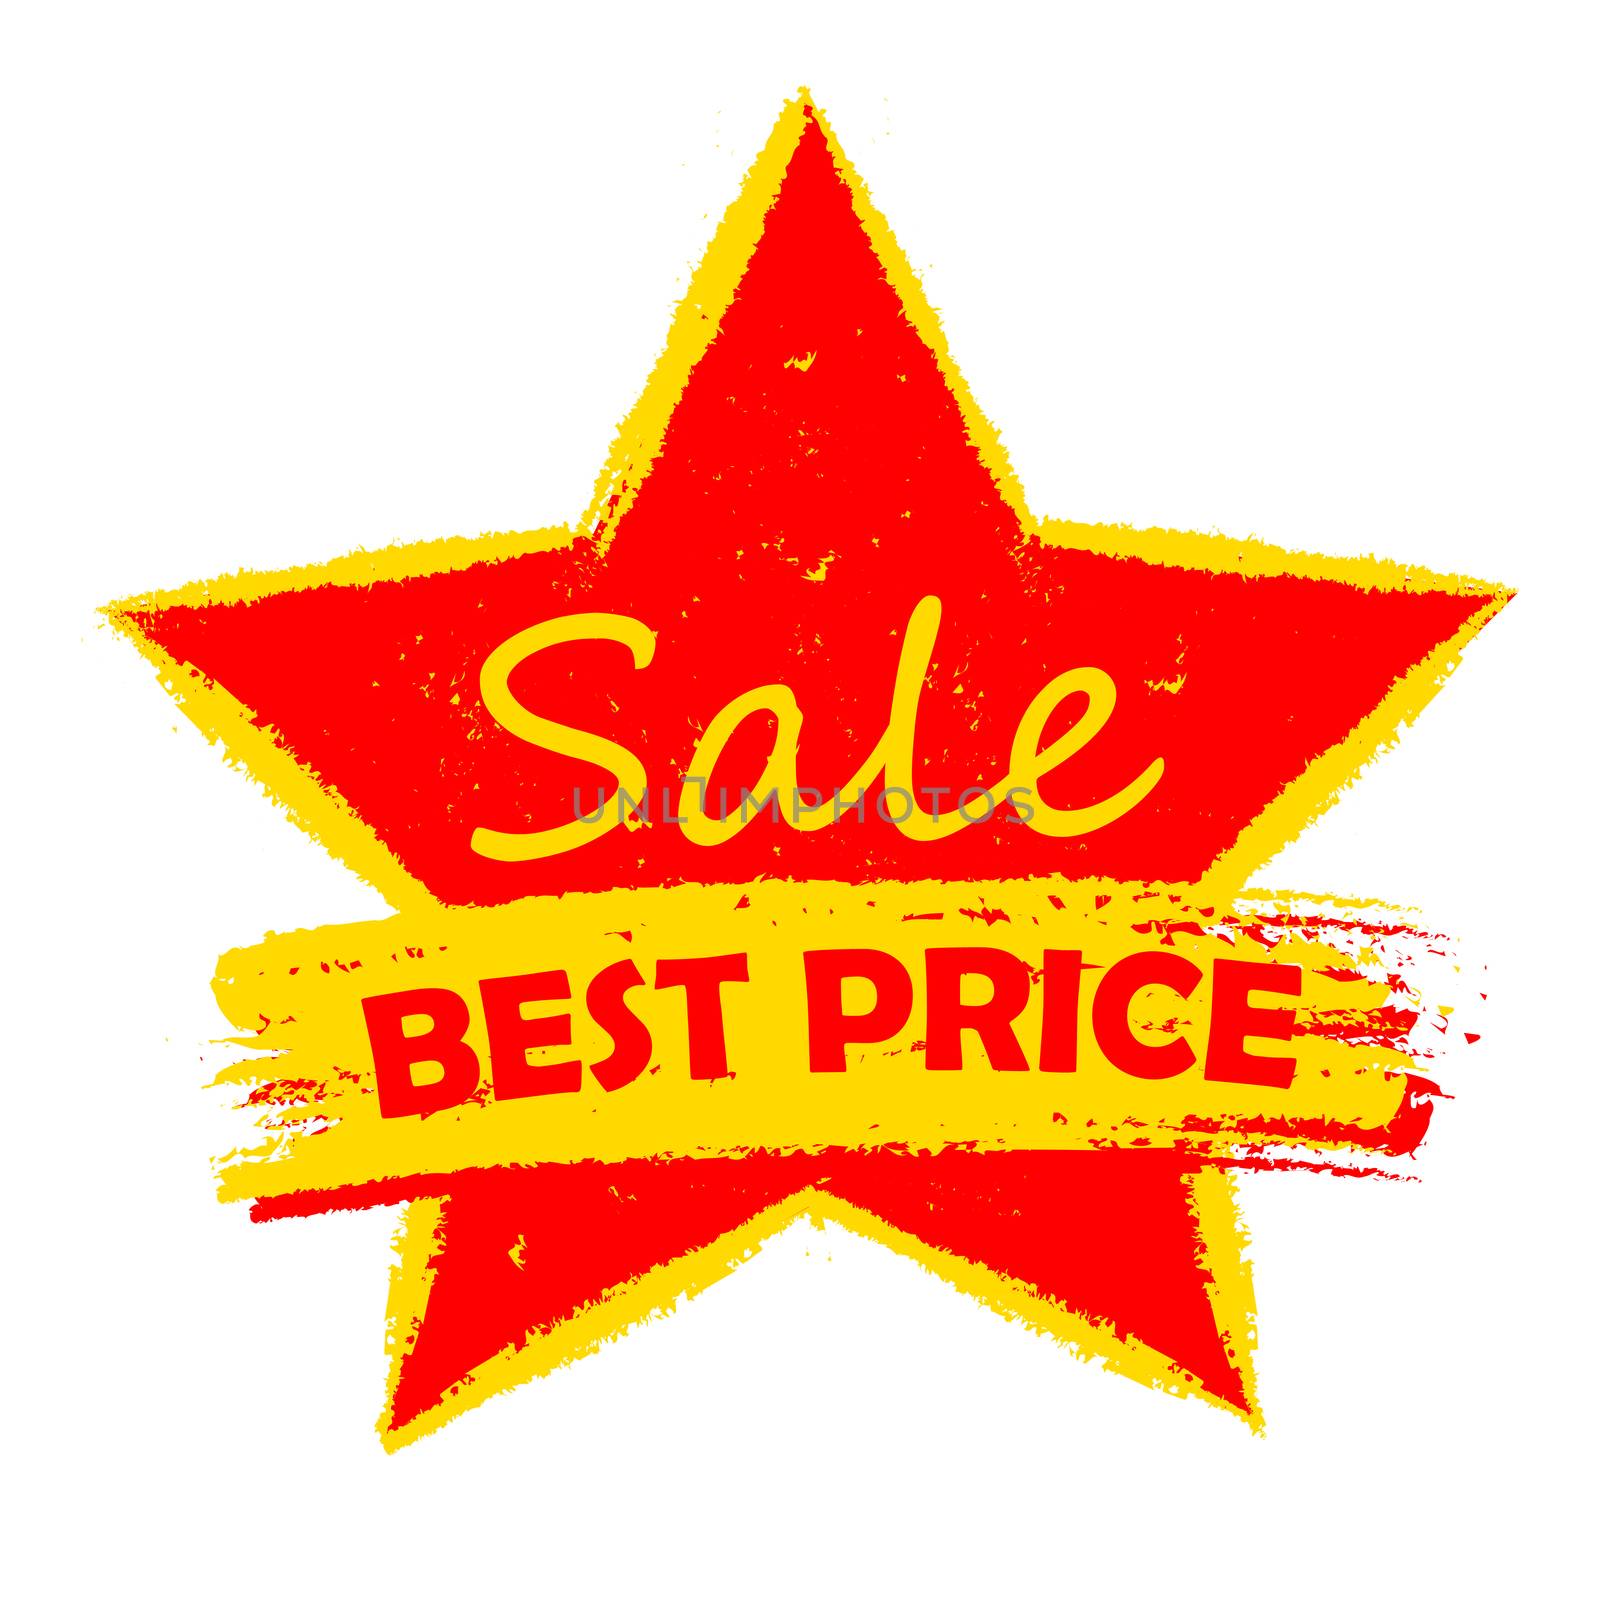 best price sale in star - text in yellow and red drawn label, business shopping concept